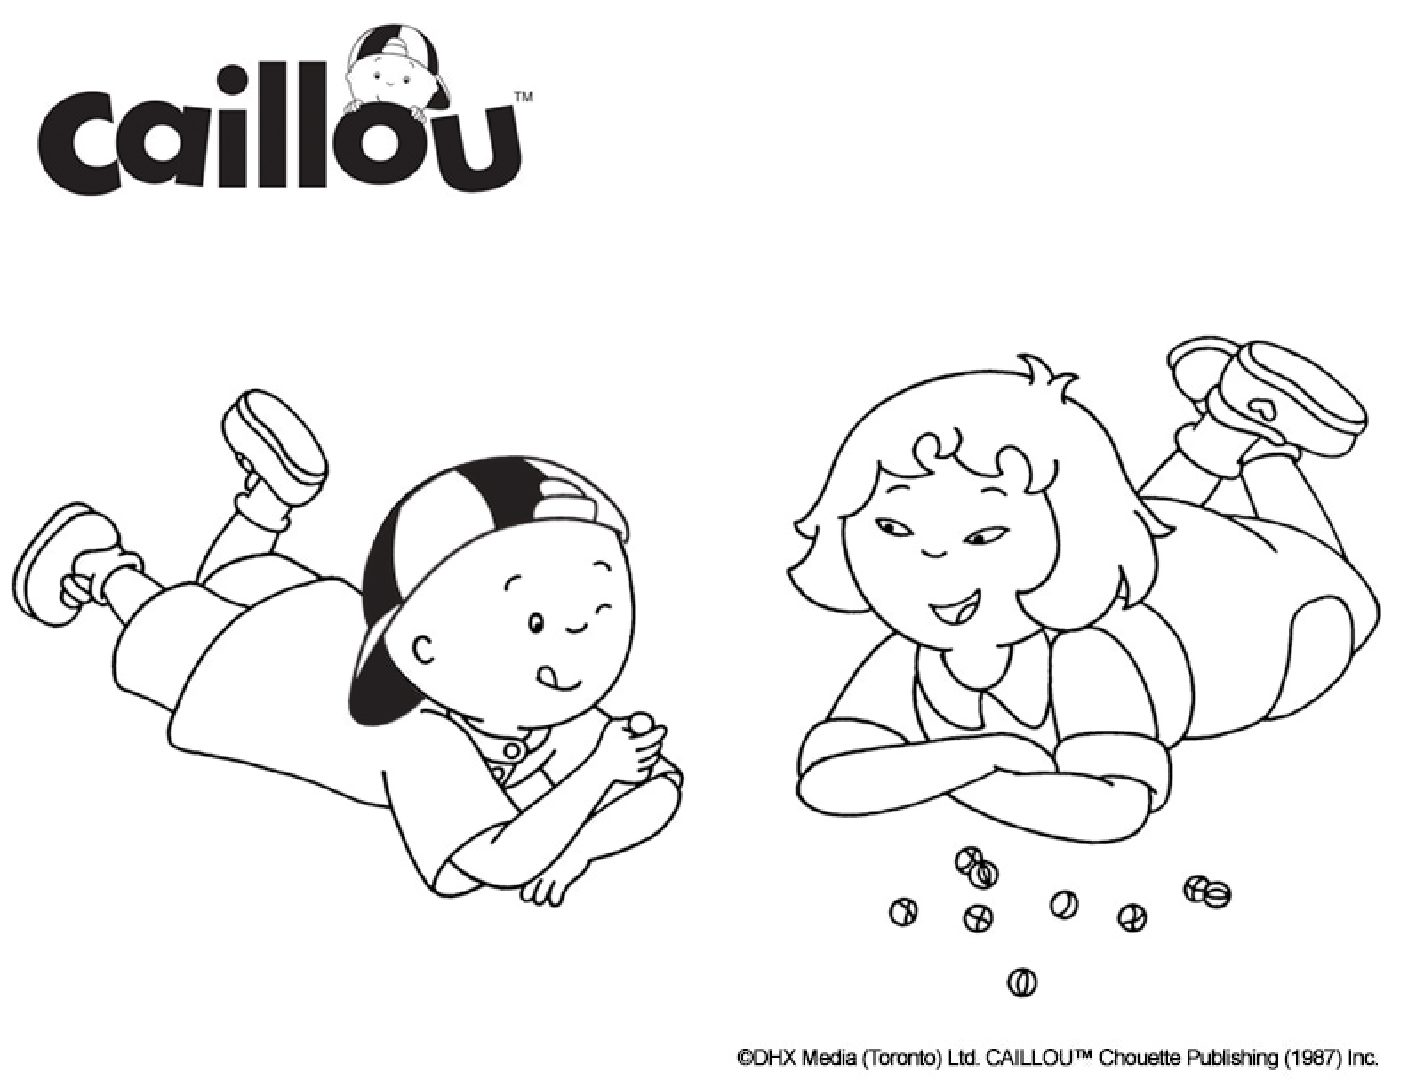 Caillou and a girl laying on a floor playing with marbples